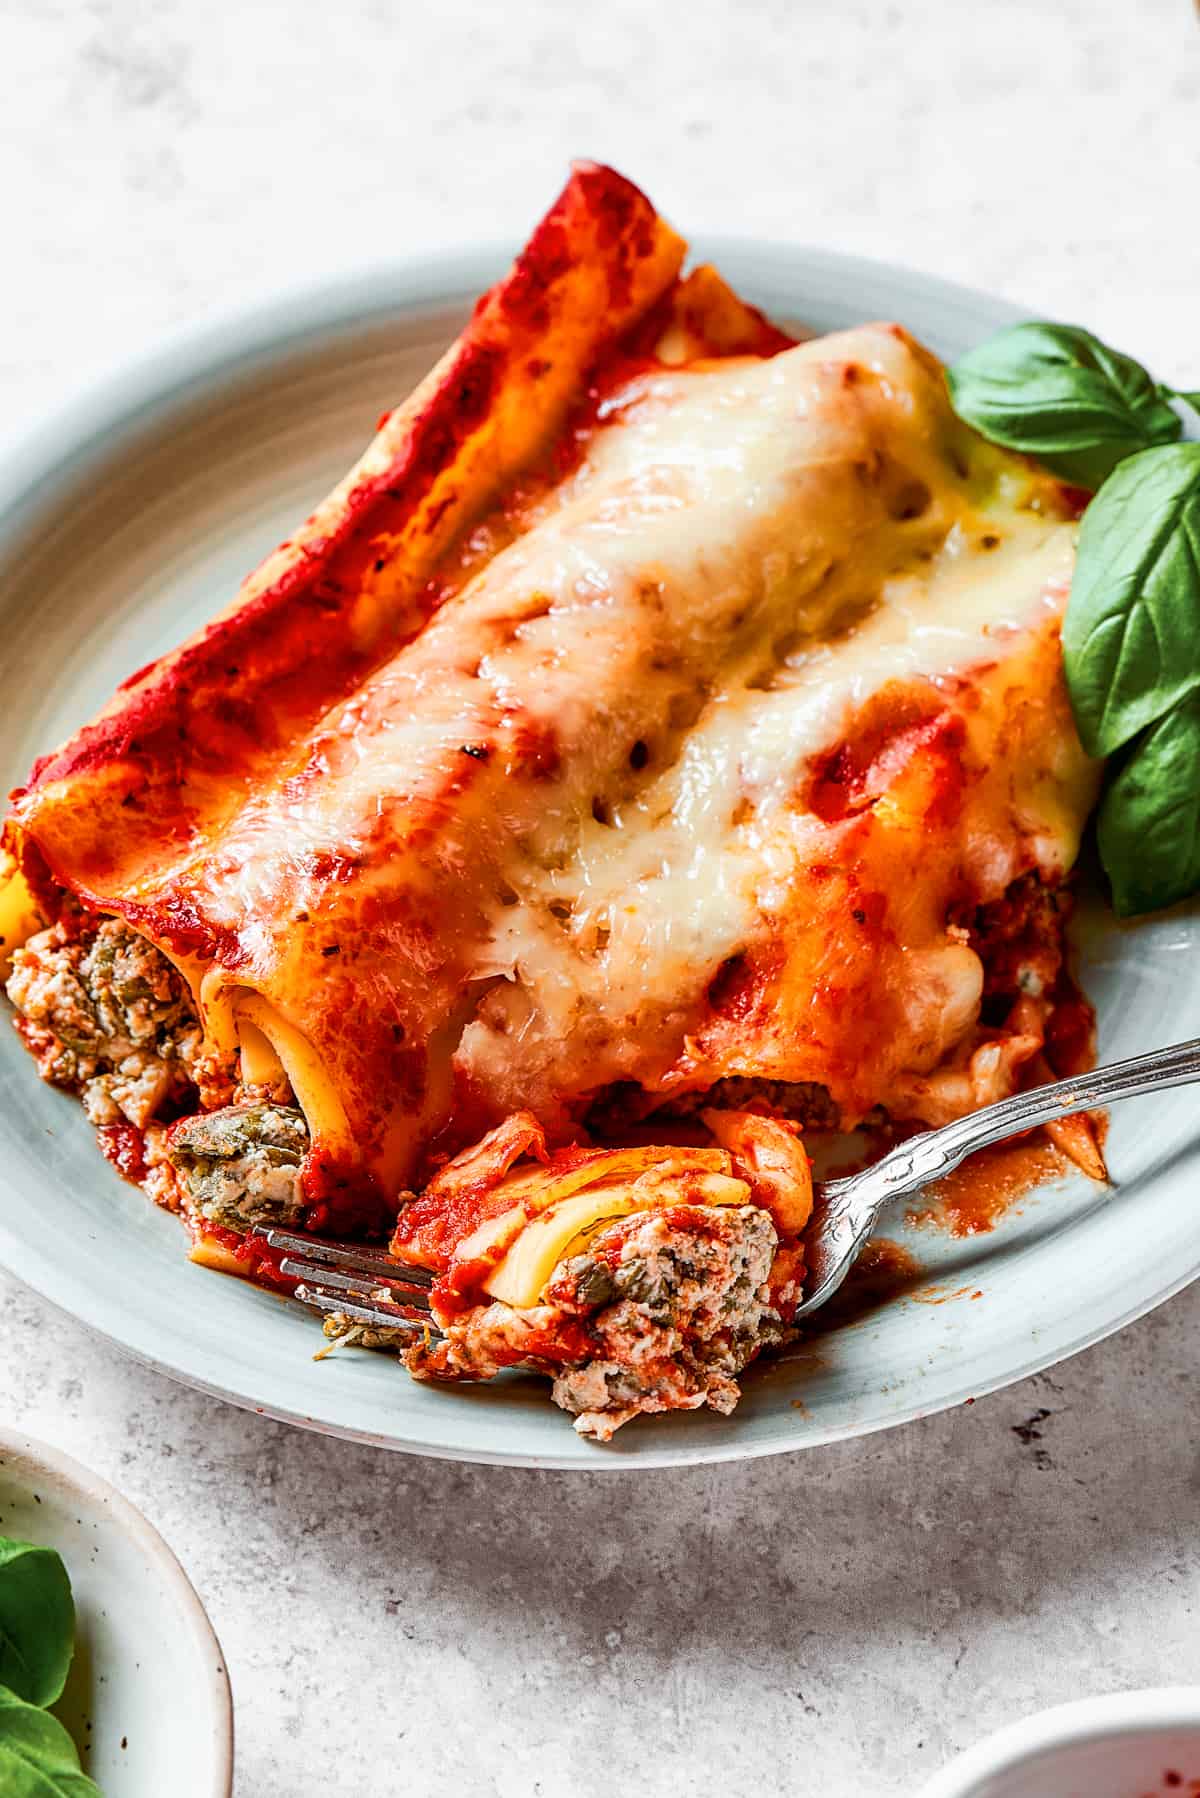 Piercing baked manicotti with a fork.